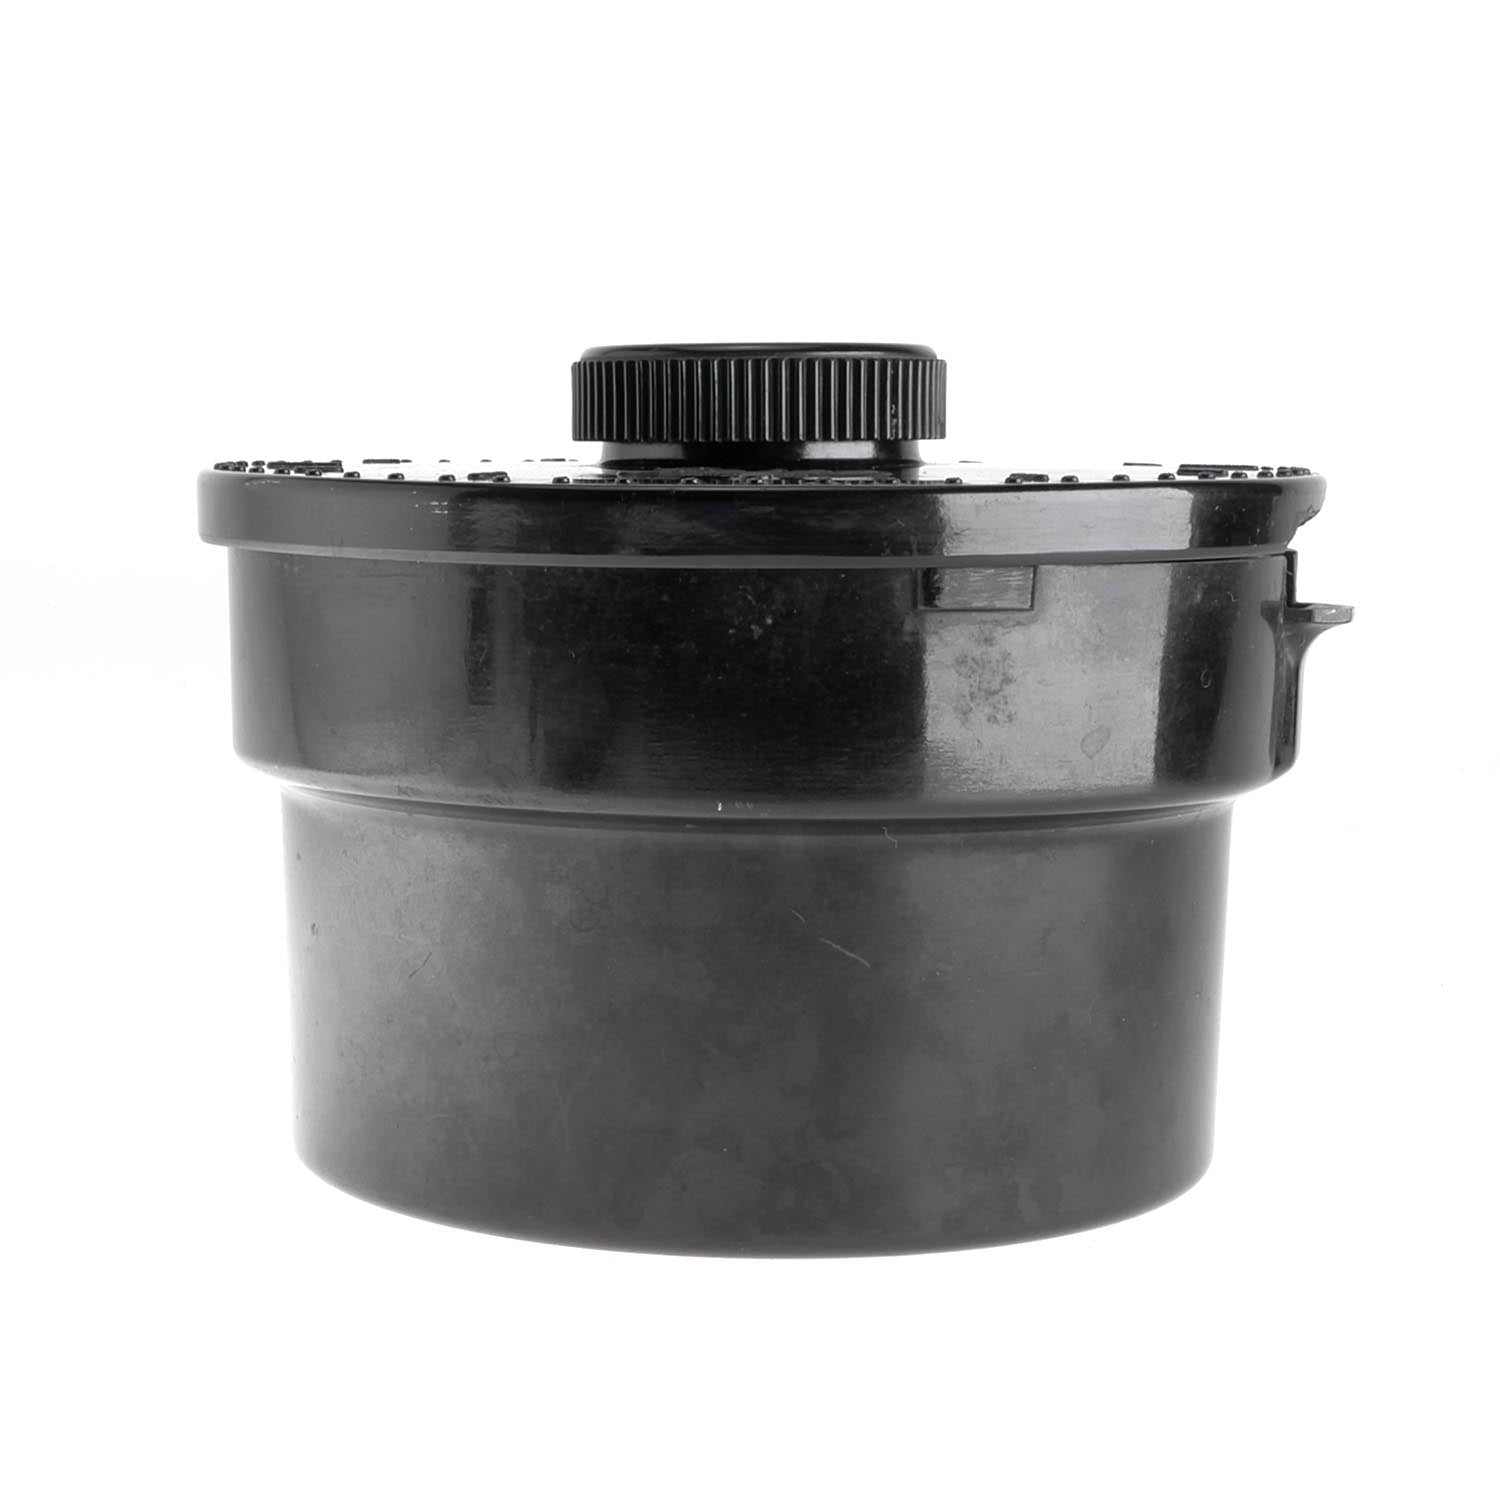 Leica Correx Developing Tank Early chipped lid ( 8+ )